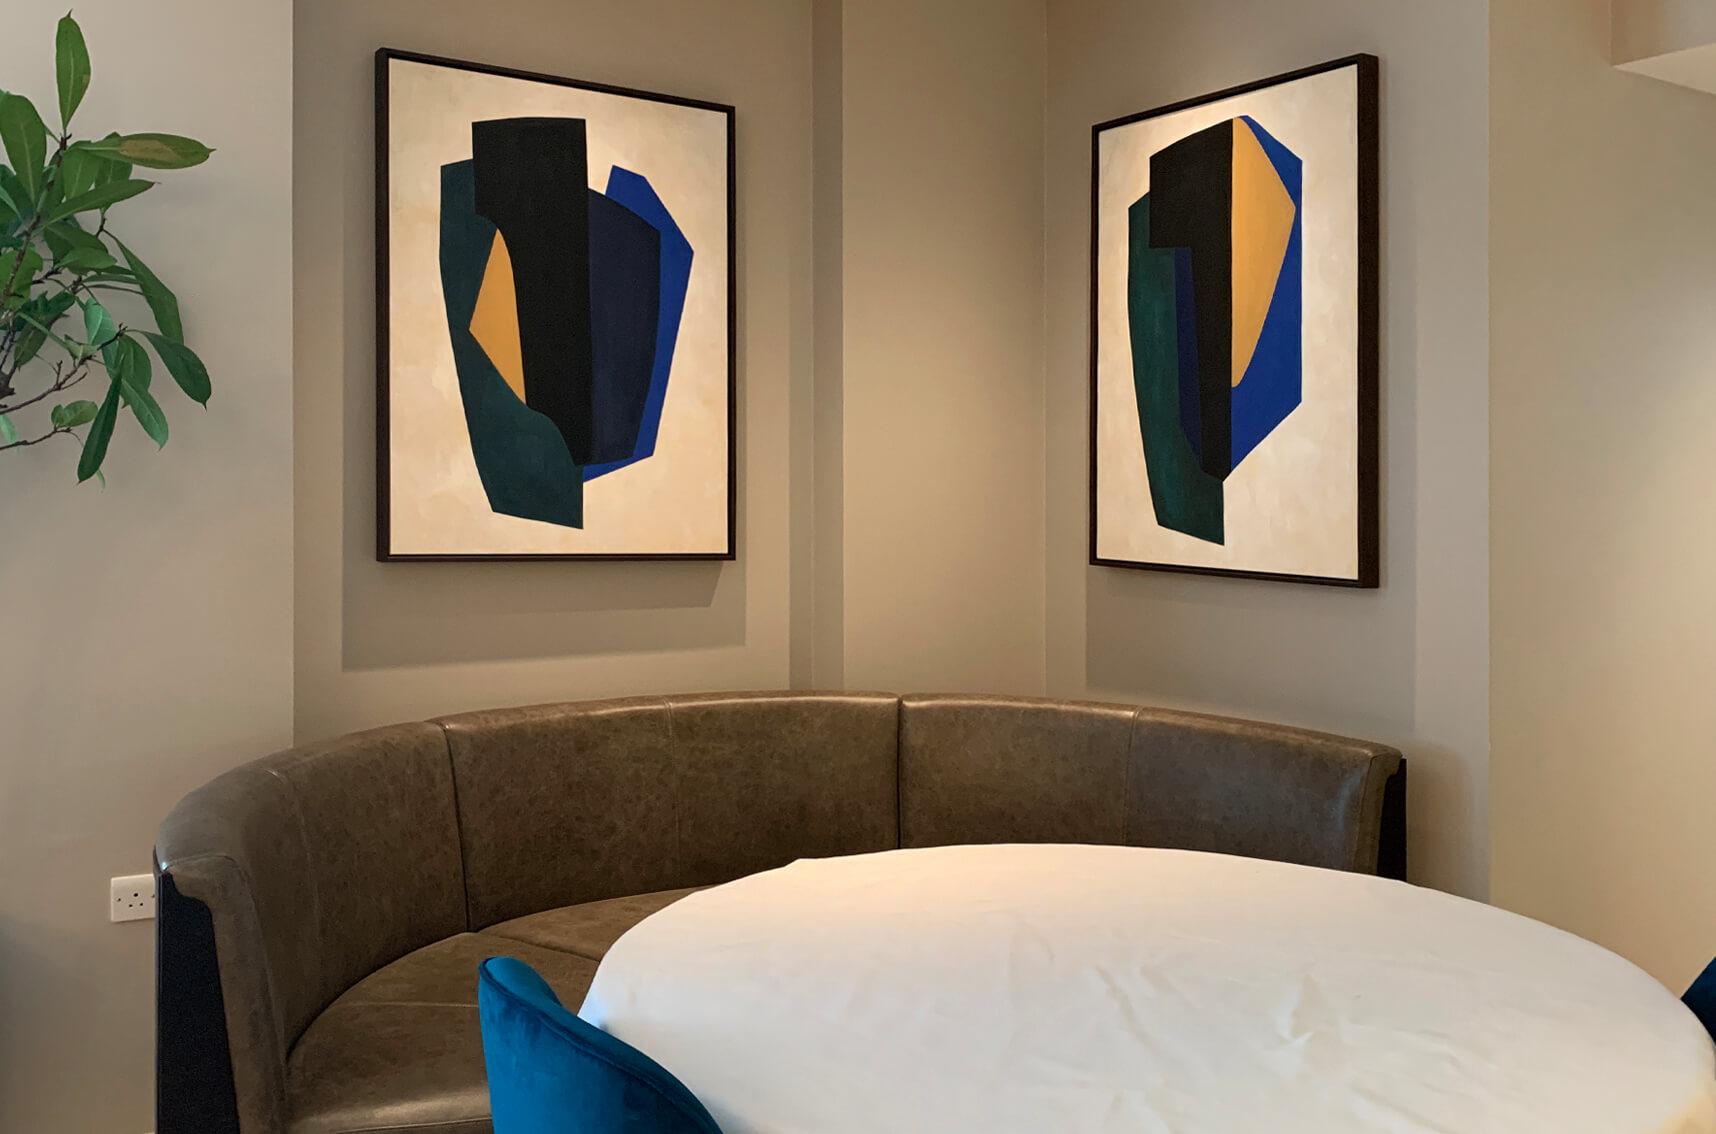 Cord Restaurant, London, graphic, graphic painting, paintings, framed paintings, geometric painting, geometric design, bold painting, art for interiors, interior design, interior designers, framed artwork, commissioned art, bespoke paintings